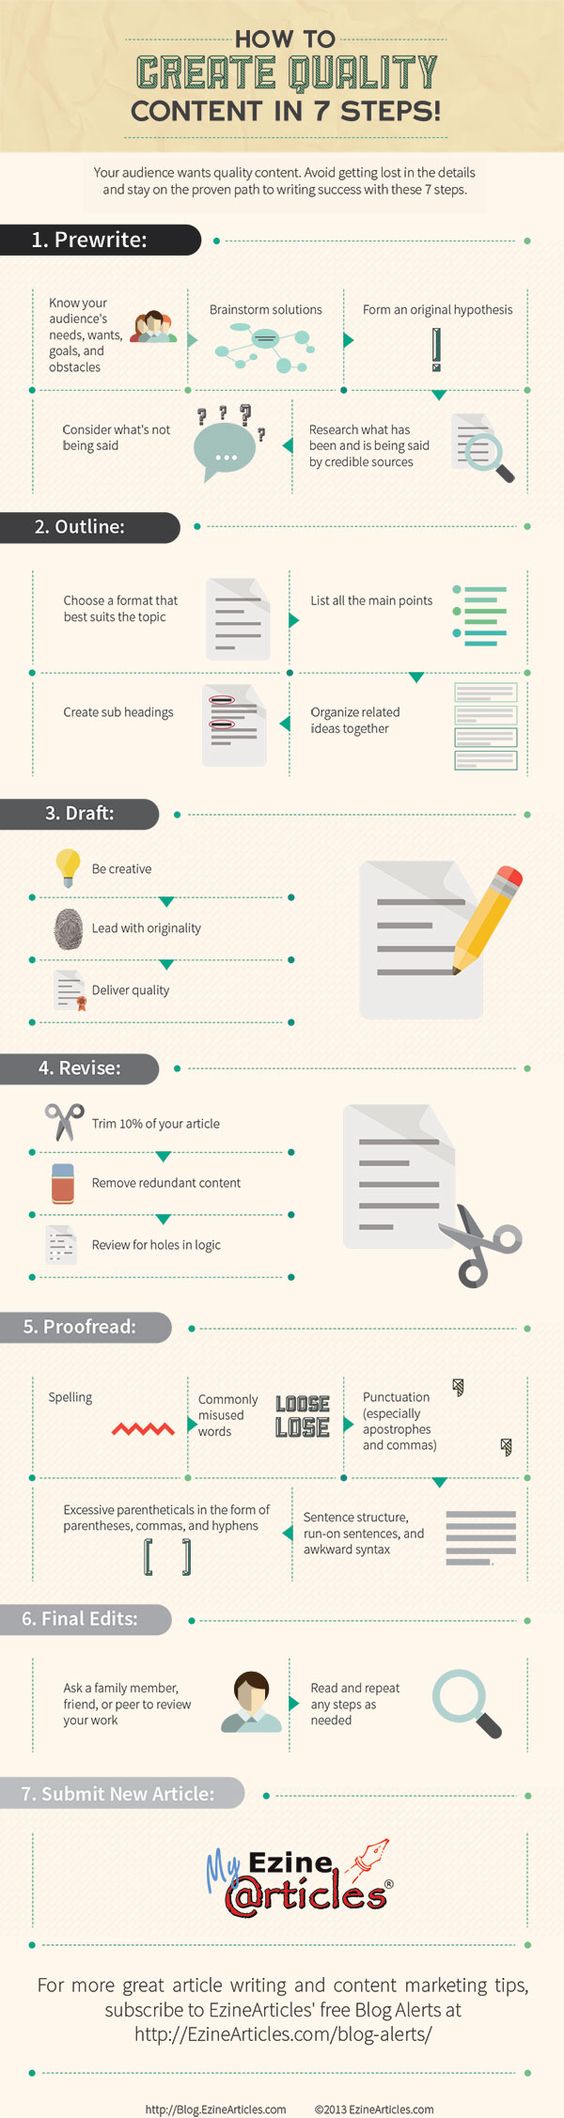 How To Create Quality Content In 7 Steps! - #infographic